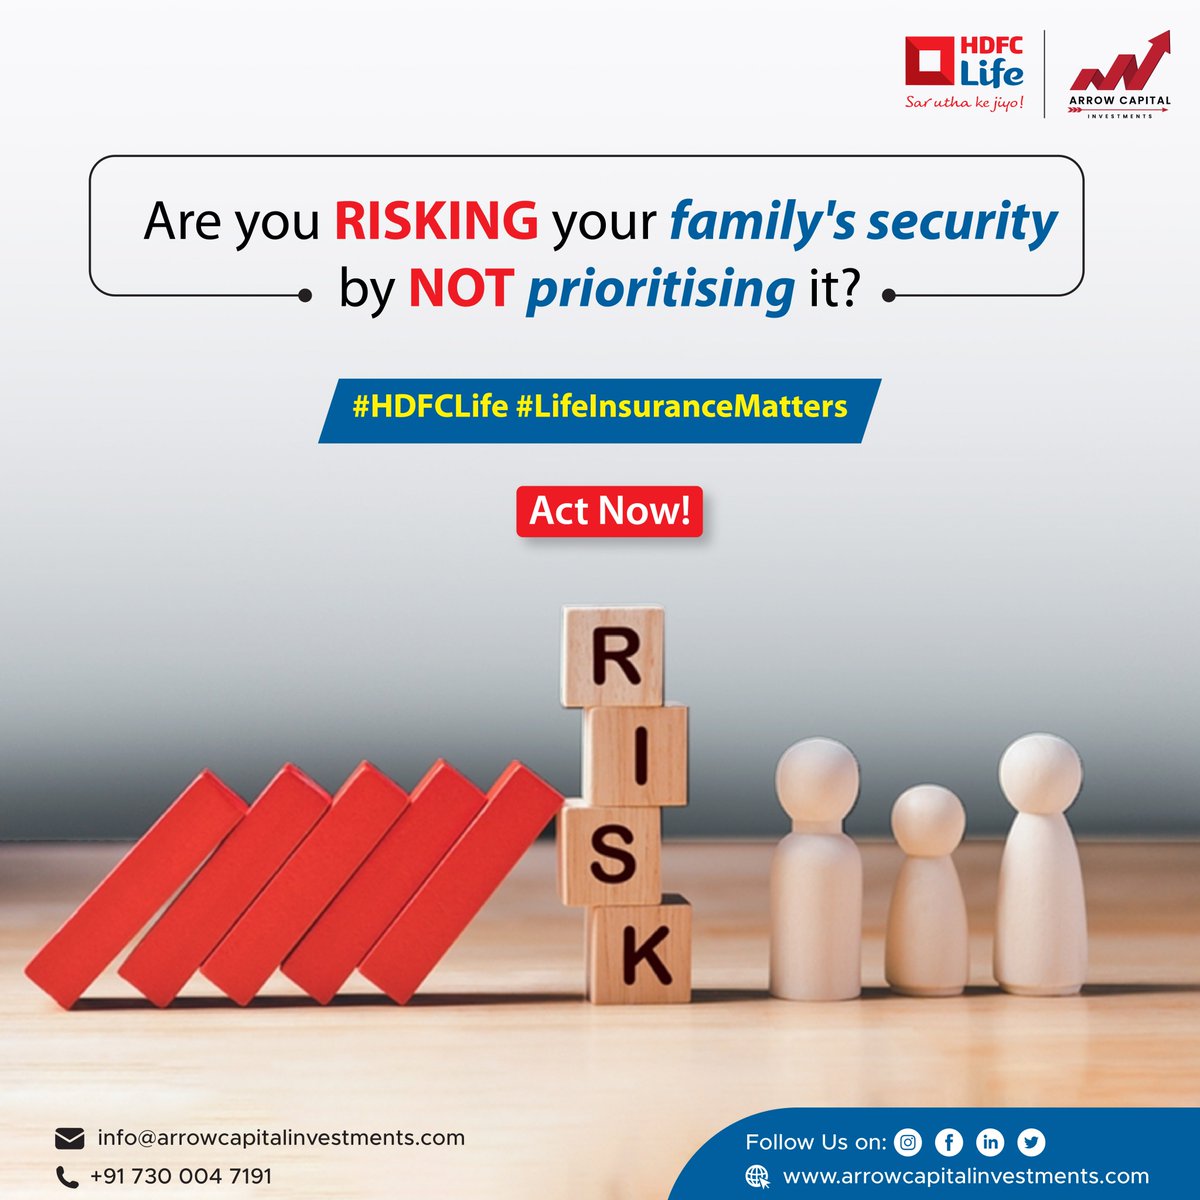 Don't leave your family's future to chance! Take control and prioritise their protection with #HDFCLifeInsurance.

Act now to safeguard what matters most.   
📞 730 004 7191 | 📧 support@arrowcapitalinvestments.com | 🌐arrowcapitalinvestments.com

#LifeInsuranceMatters #SecureFamily